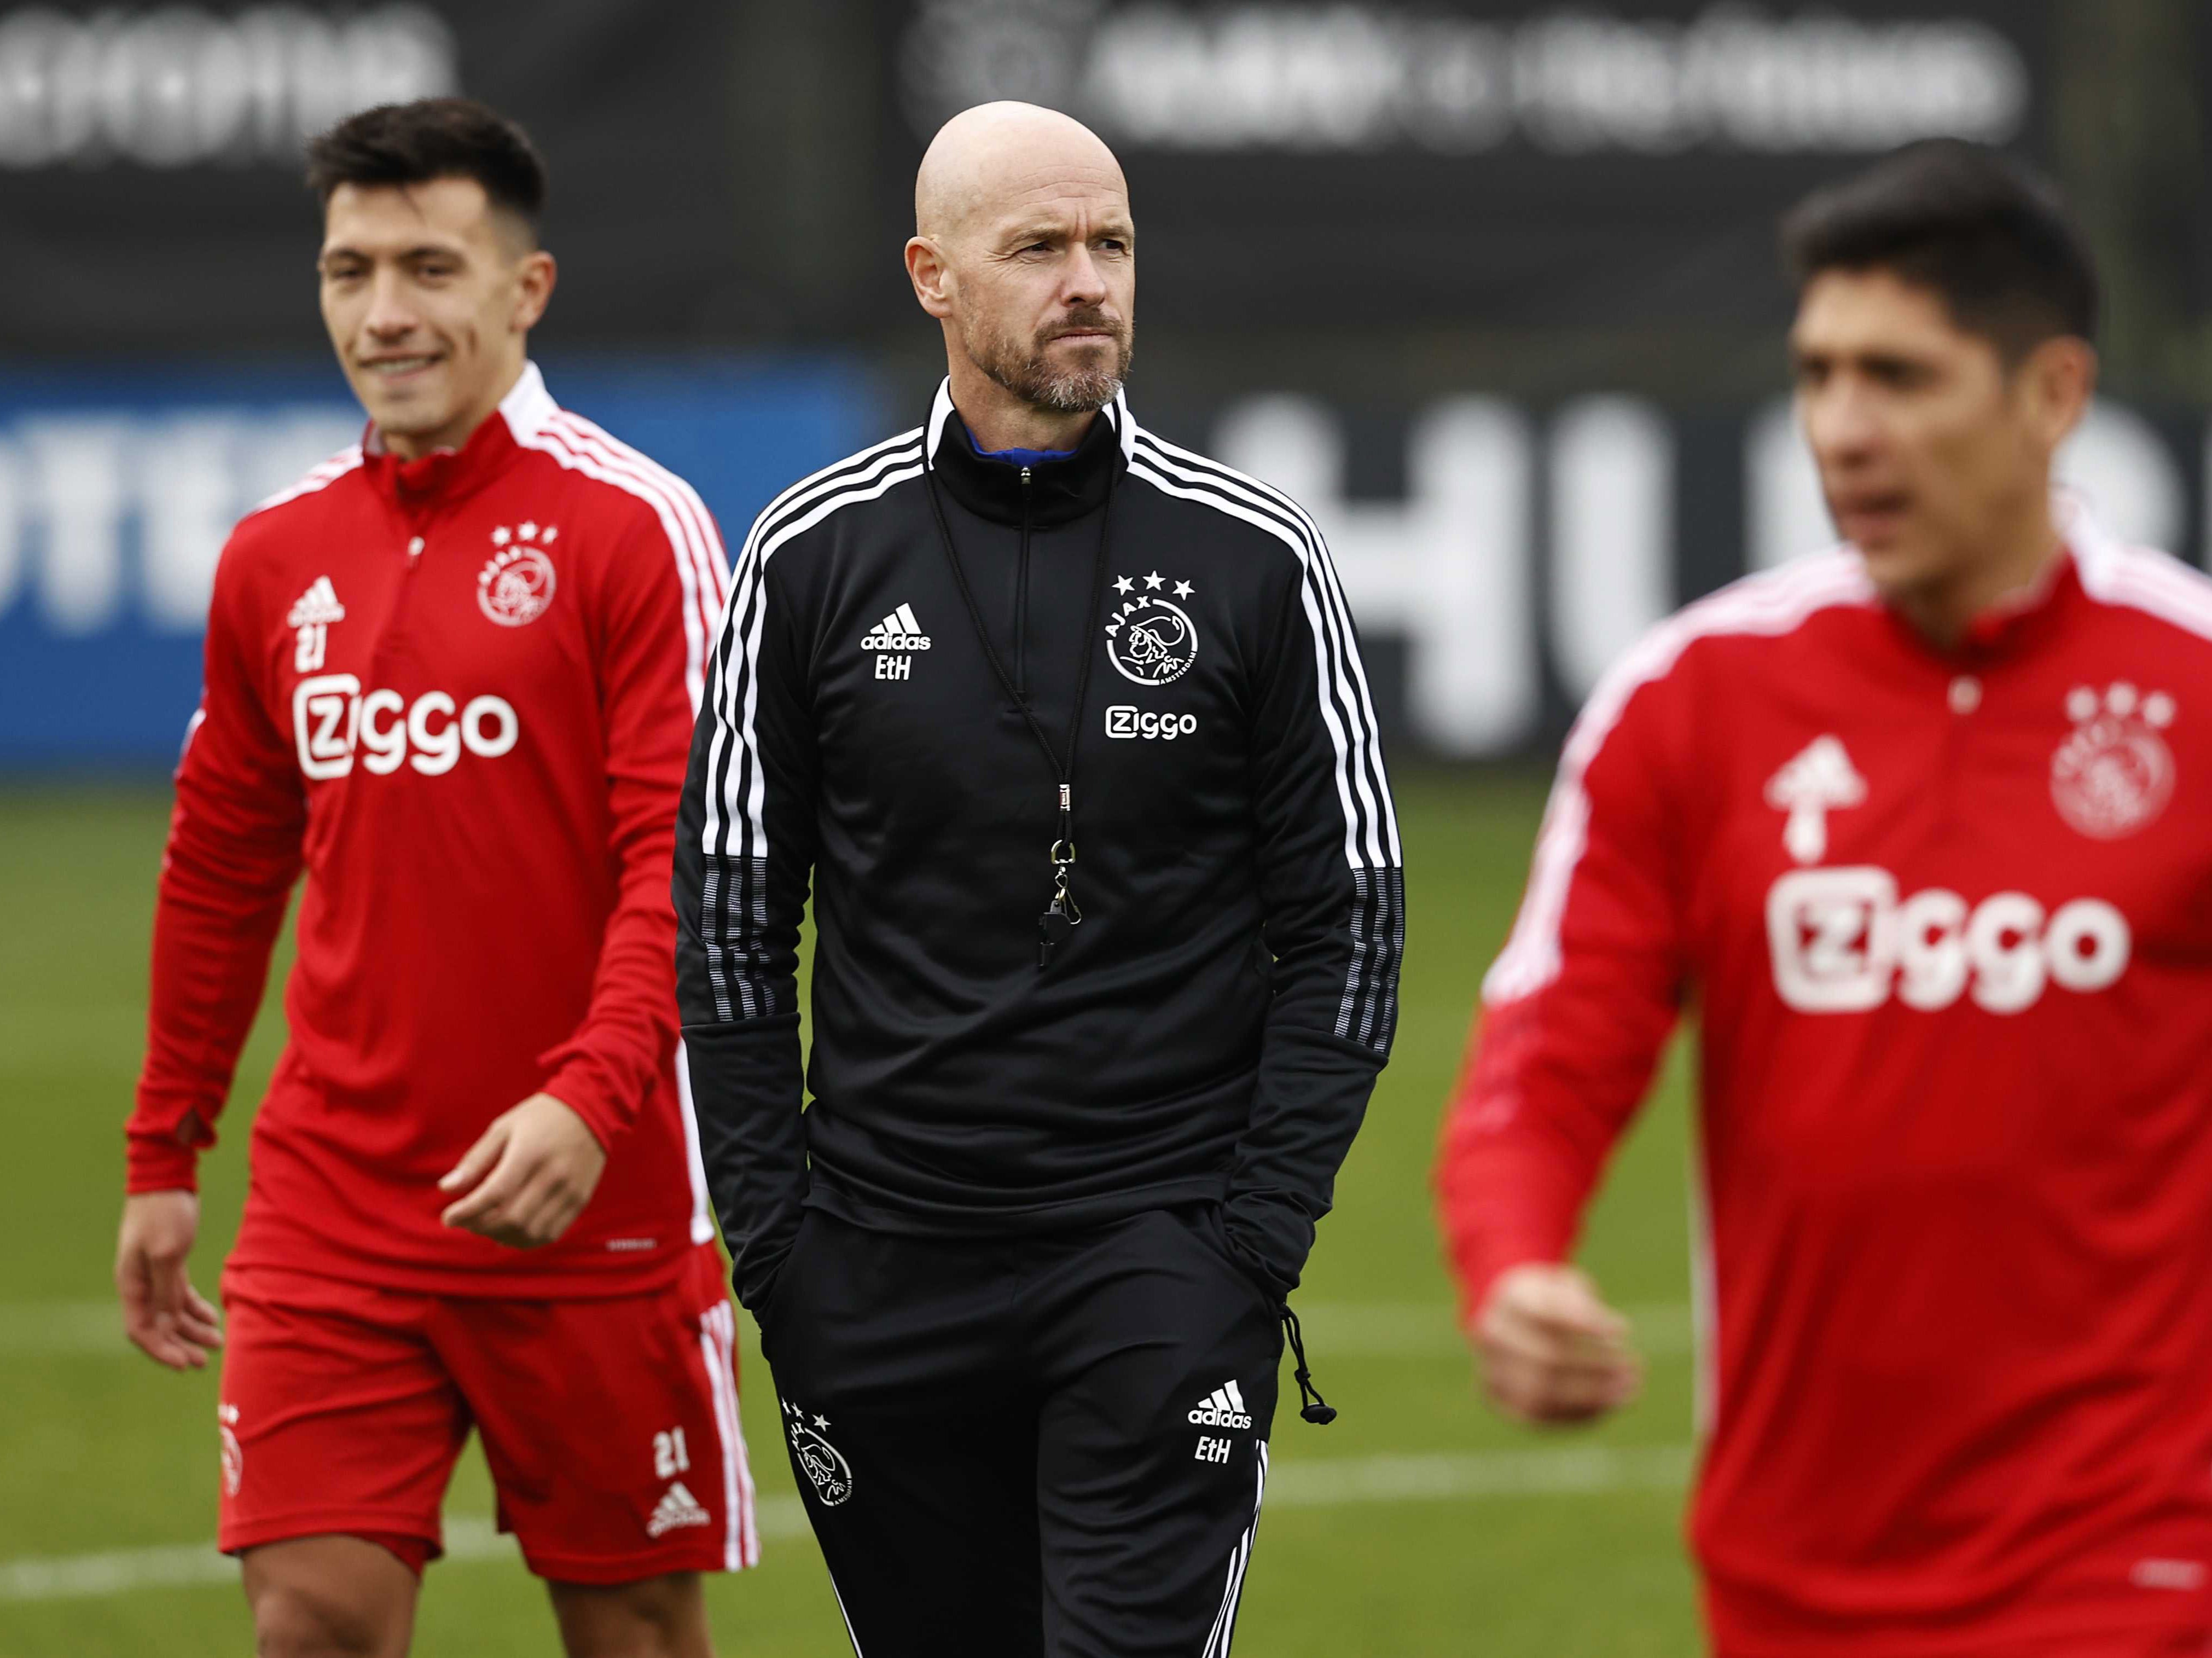 Erik ten Hag has forged a reputation as one of the next great coaches in European football